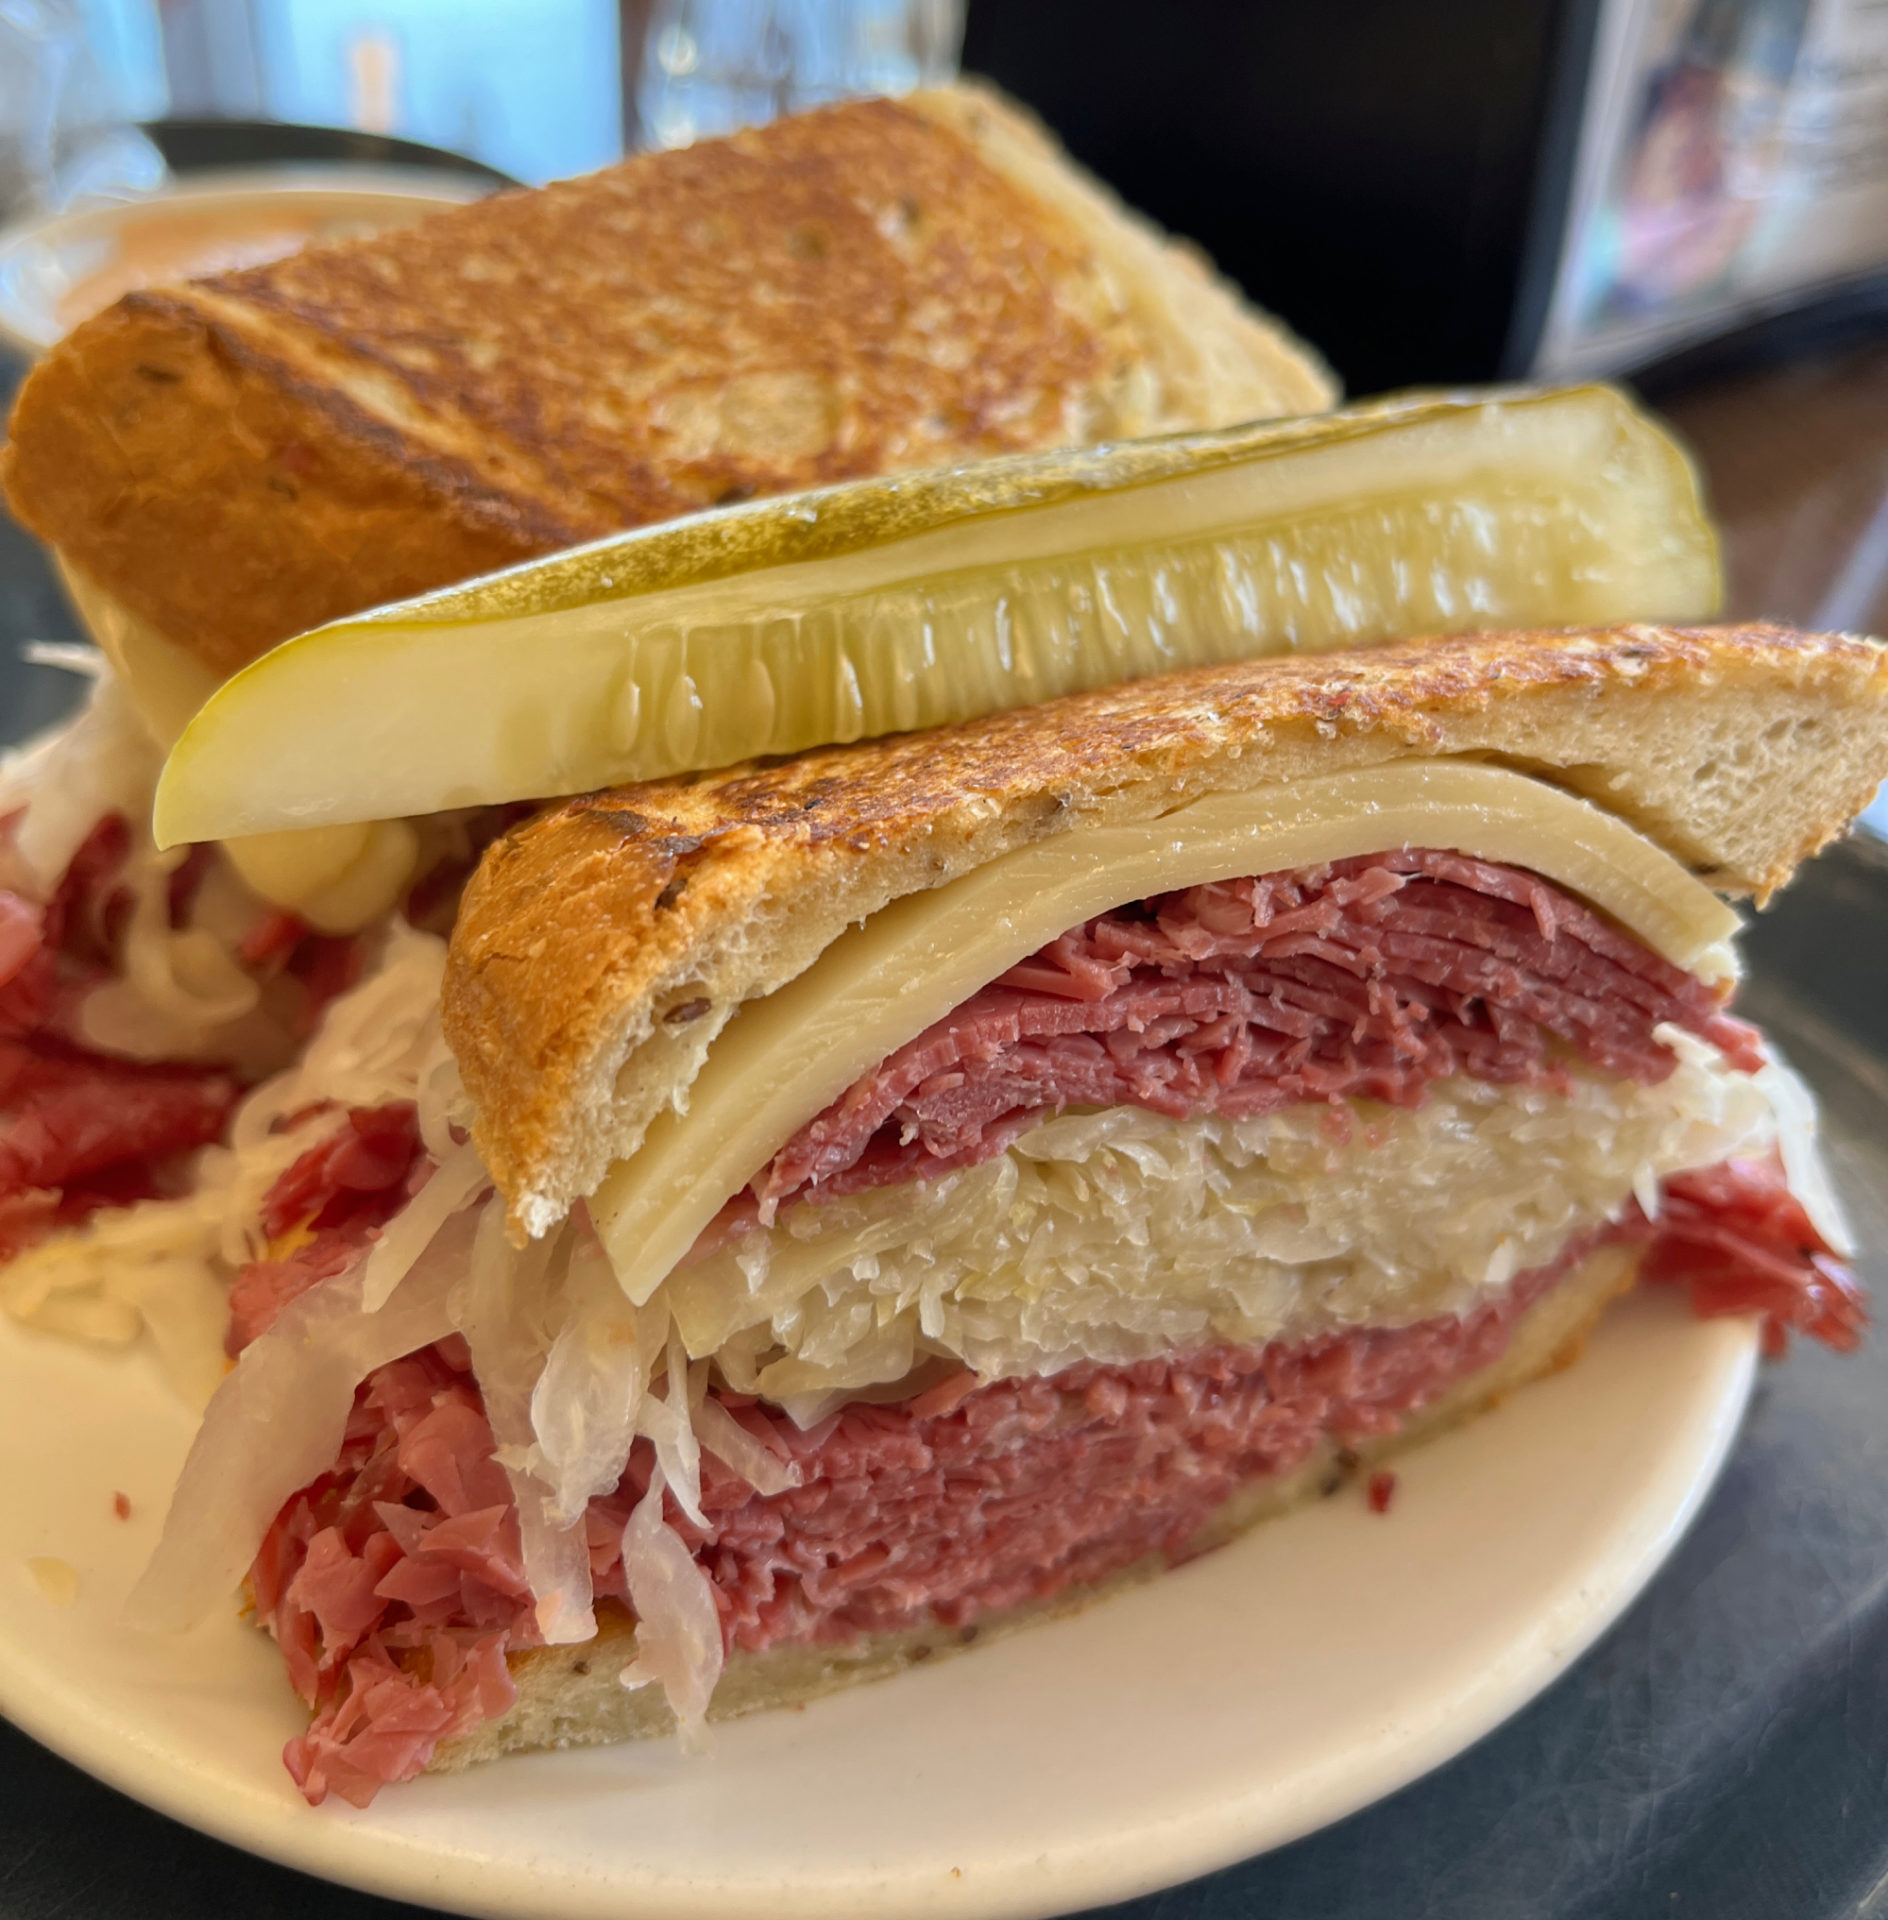 A huge Reuben sandwich with a large ribbon of sauerkraut between the corned beef. There is a pickle spear on top on one half.